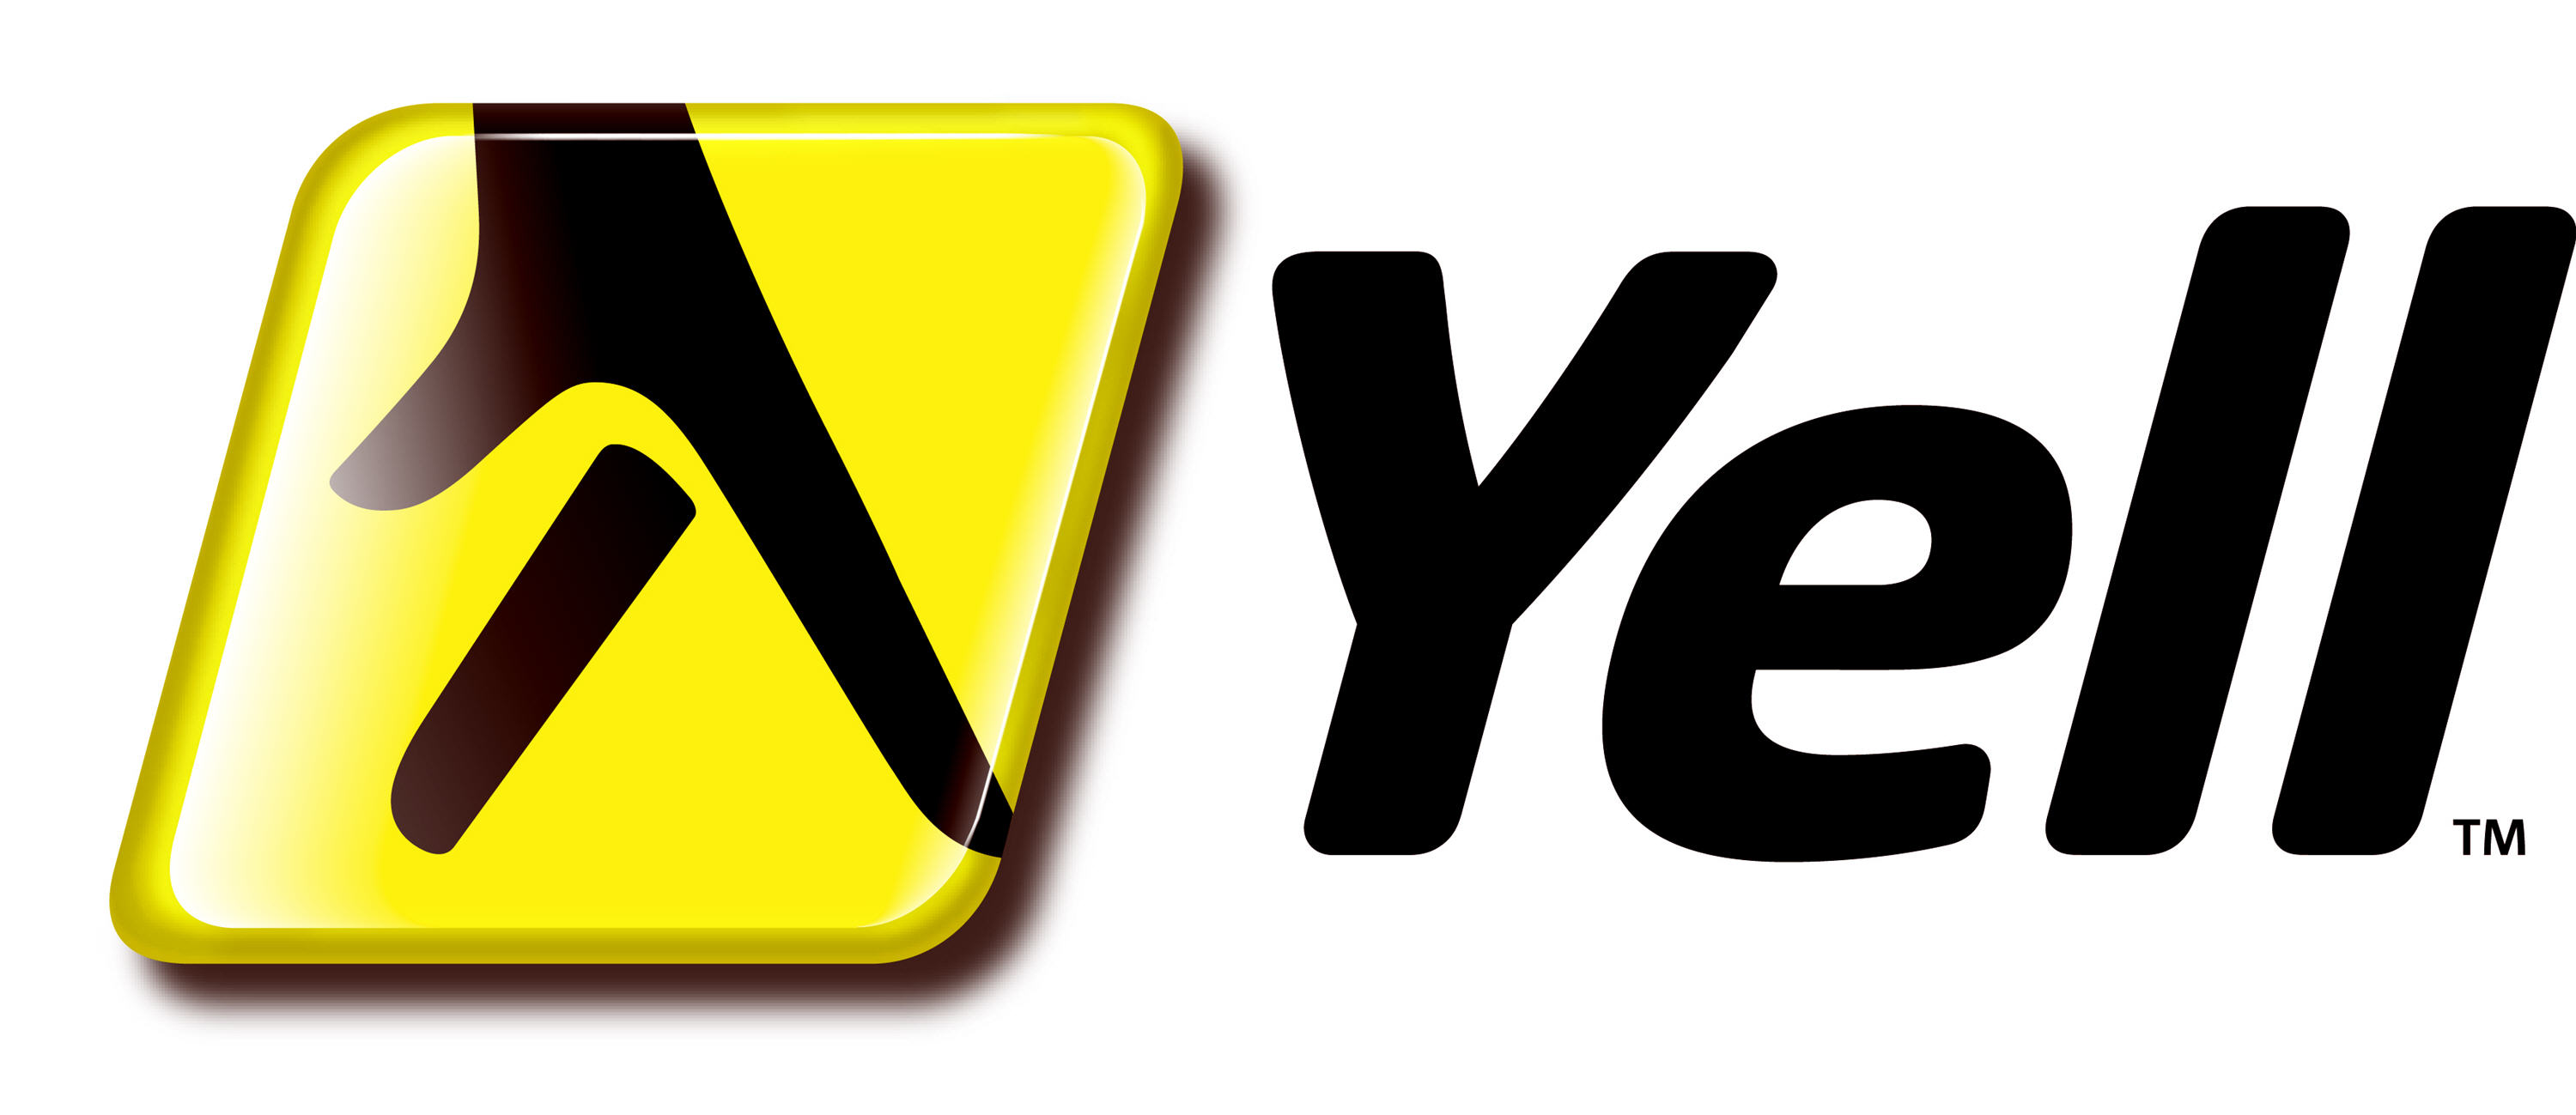 Yellow Pages / Yell.com Brand Logo